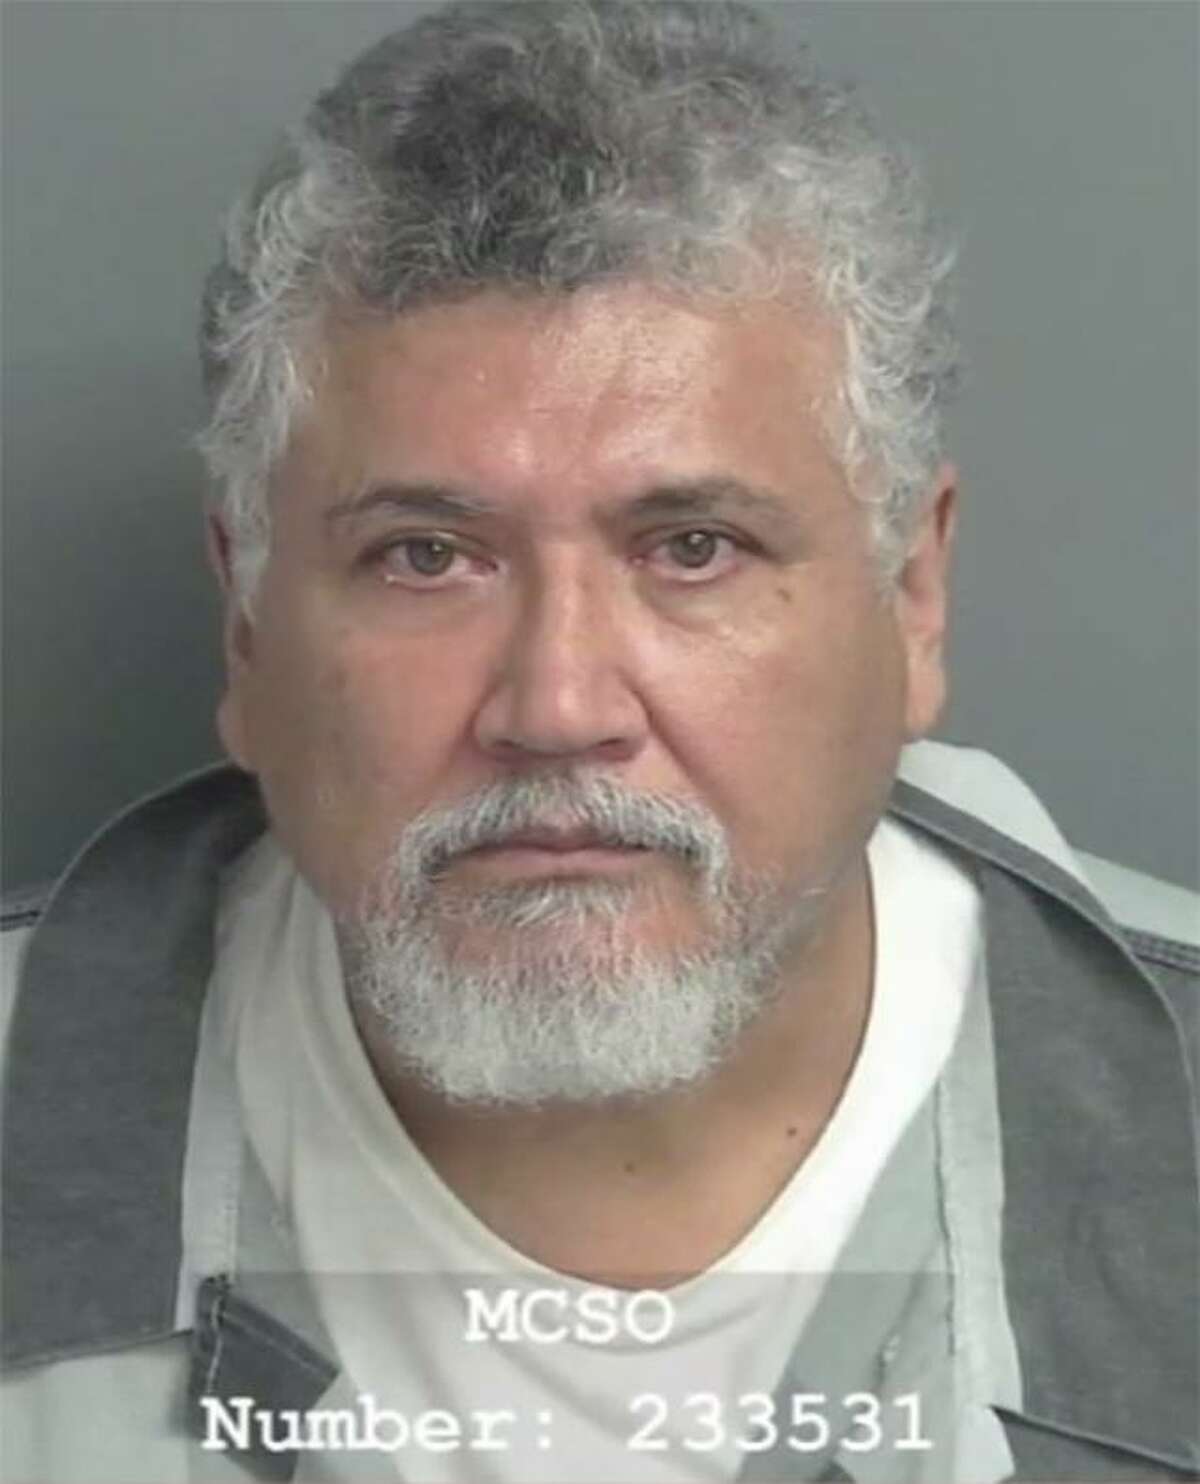 Father Manuel La Rosa-Lopez is charged with sexually abusing children while working at Sacred Heart Catholic Church in Conroe. La Rosa-Lopez is charged with four counts of indecency with a child.